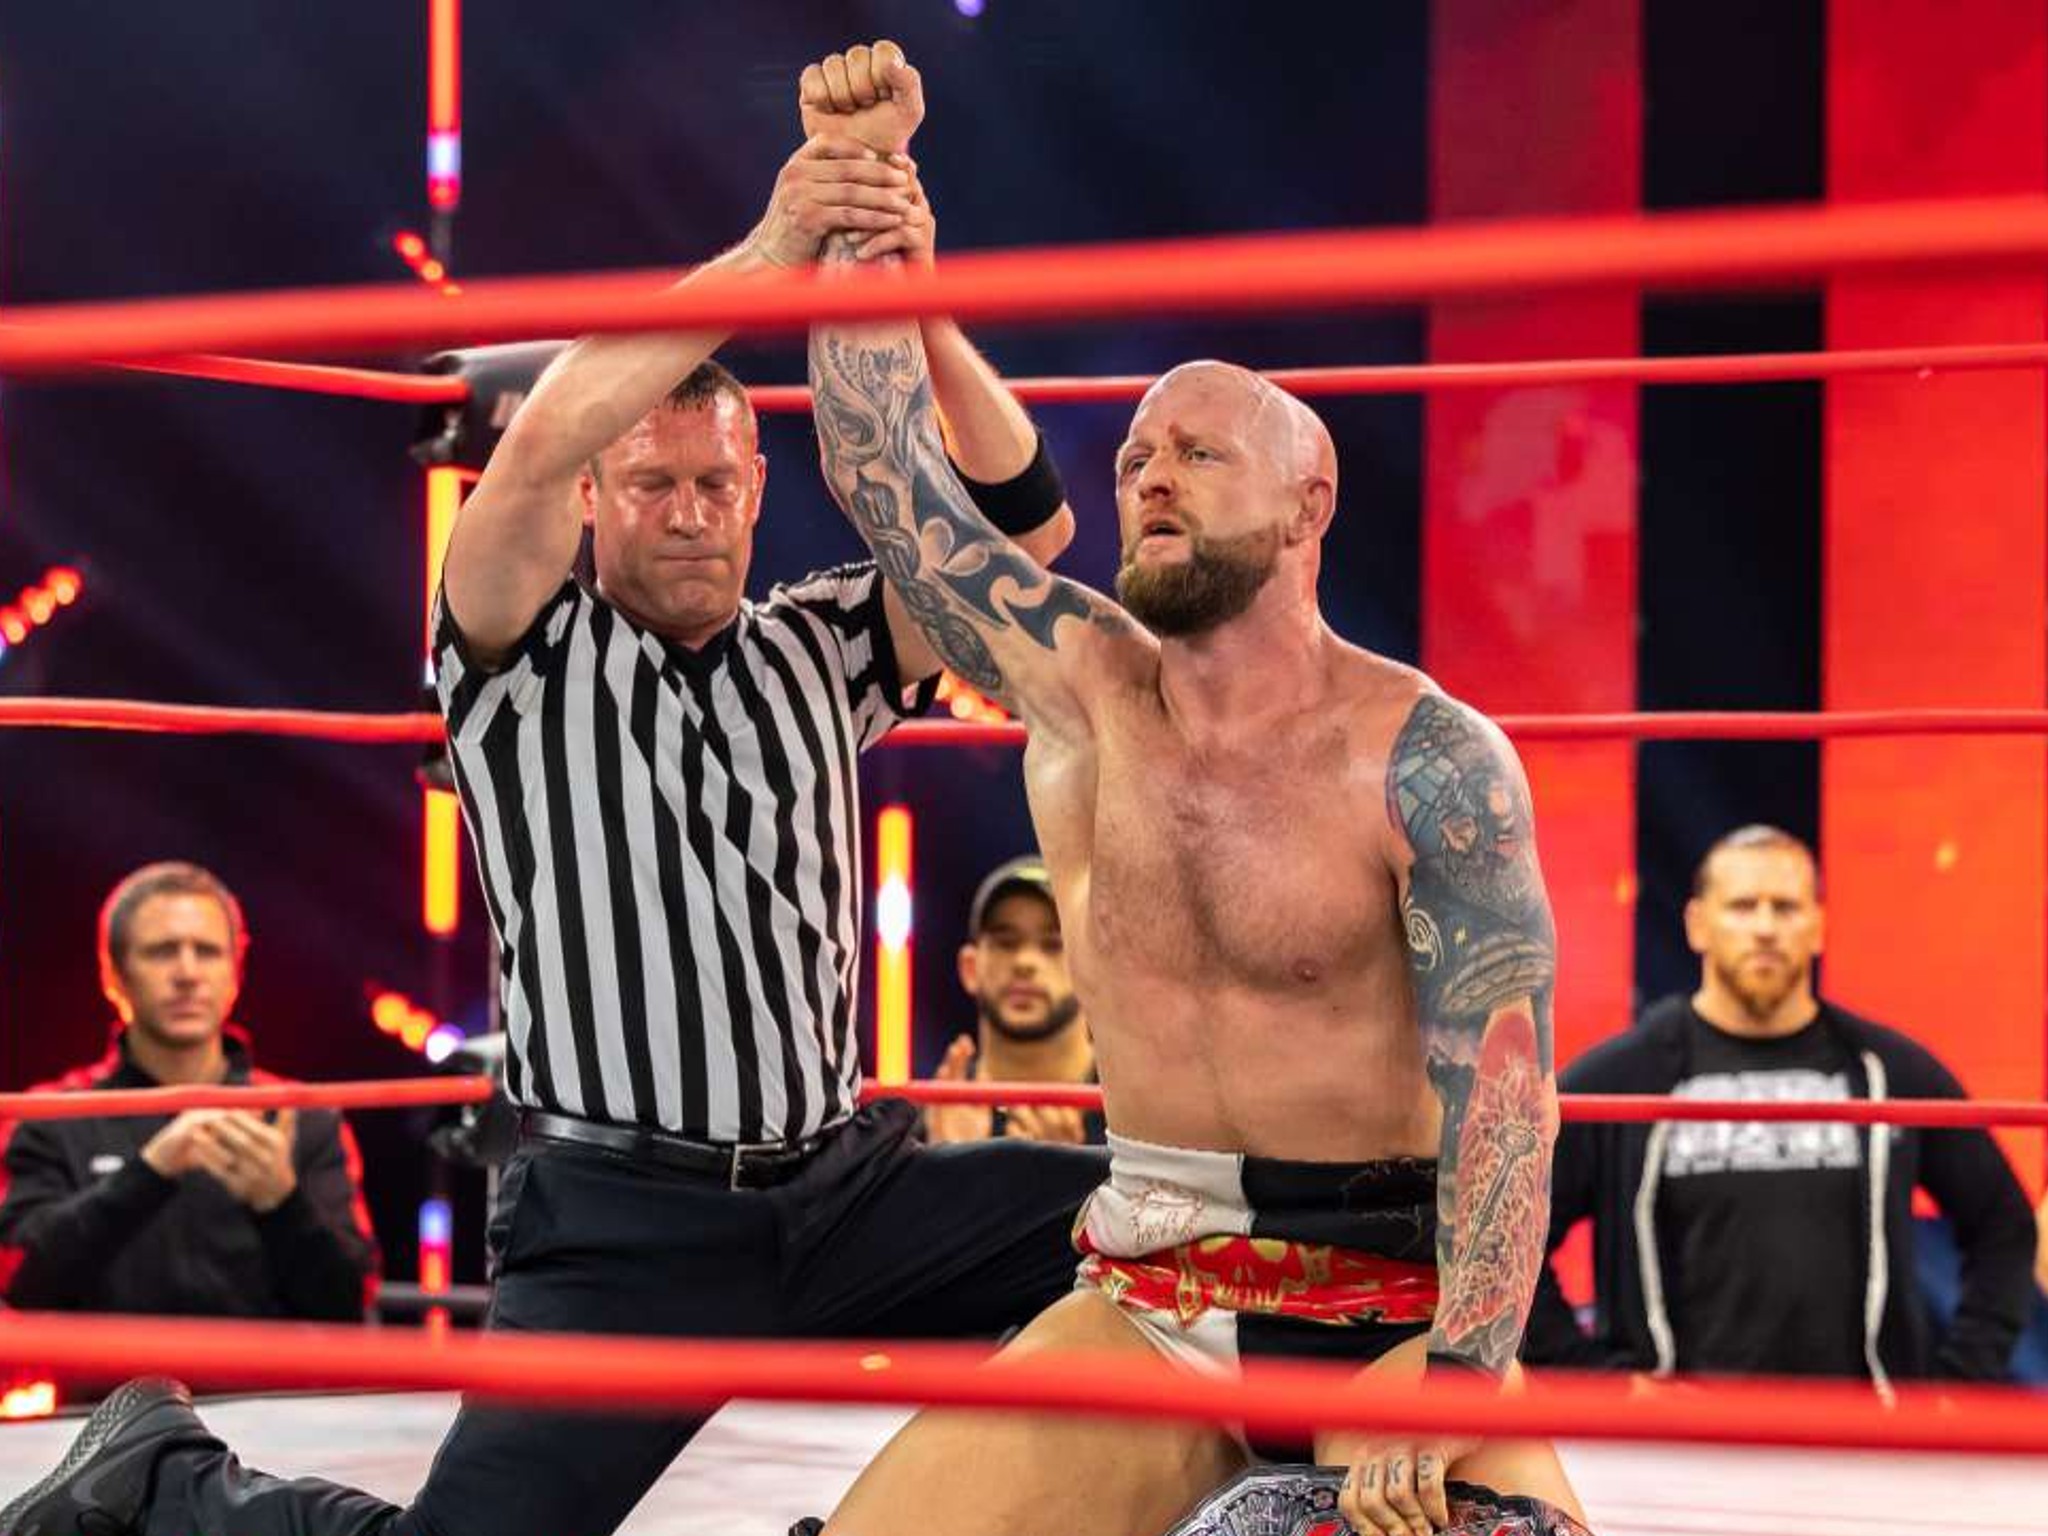 IMPACT Wrestling’s Josh Alexander has date with fate after losing day job weeks before Bound For Glory